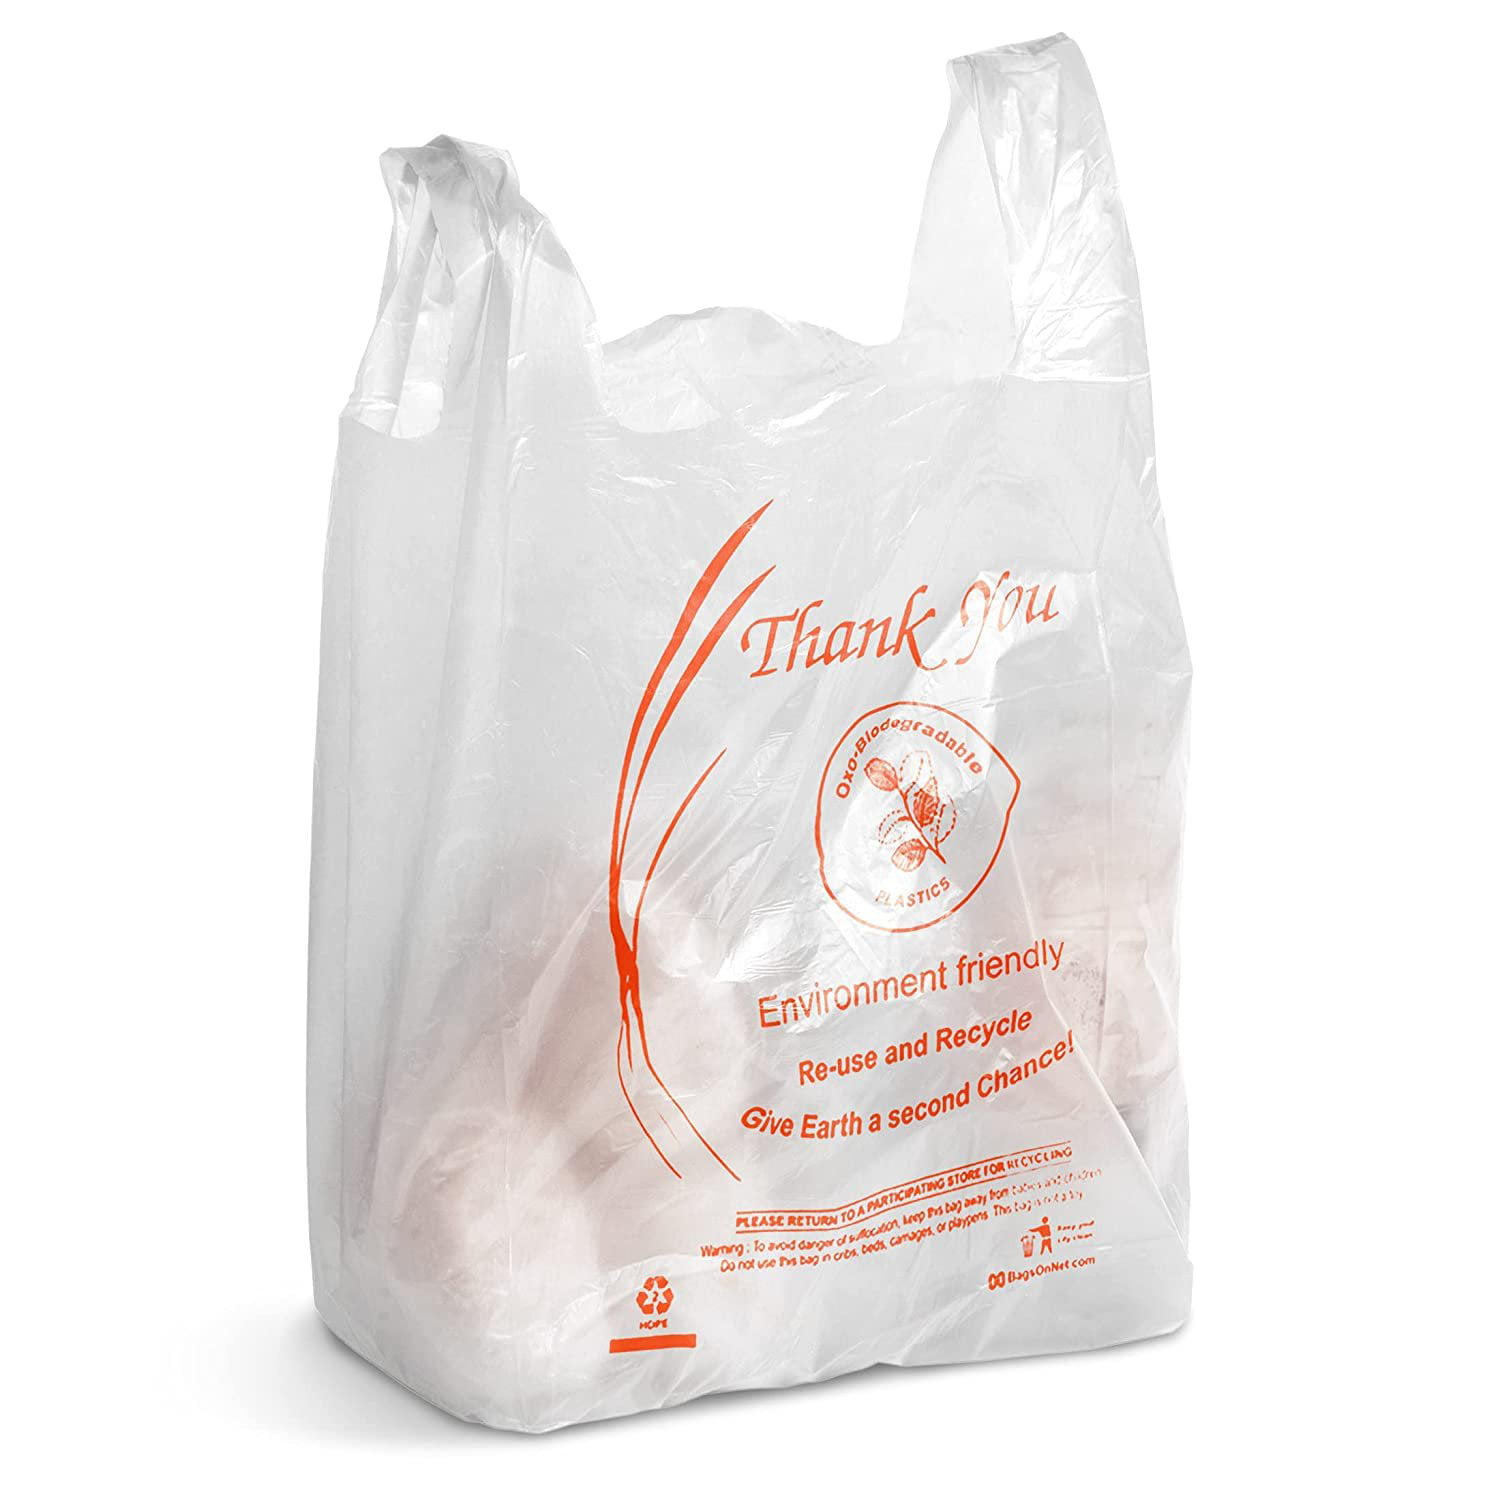 100/% Recyclable Grocery Bags Thank You White Plastic Shopping Bags T-Shirt Style Measurement 11+6x21-1000//box Reusable